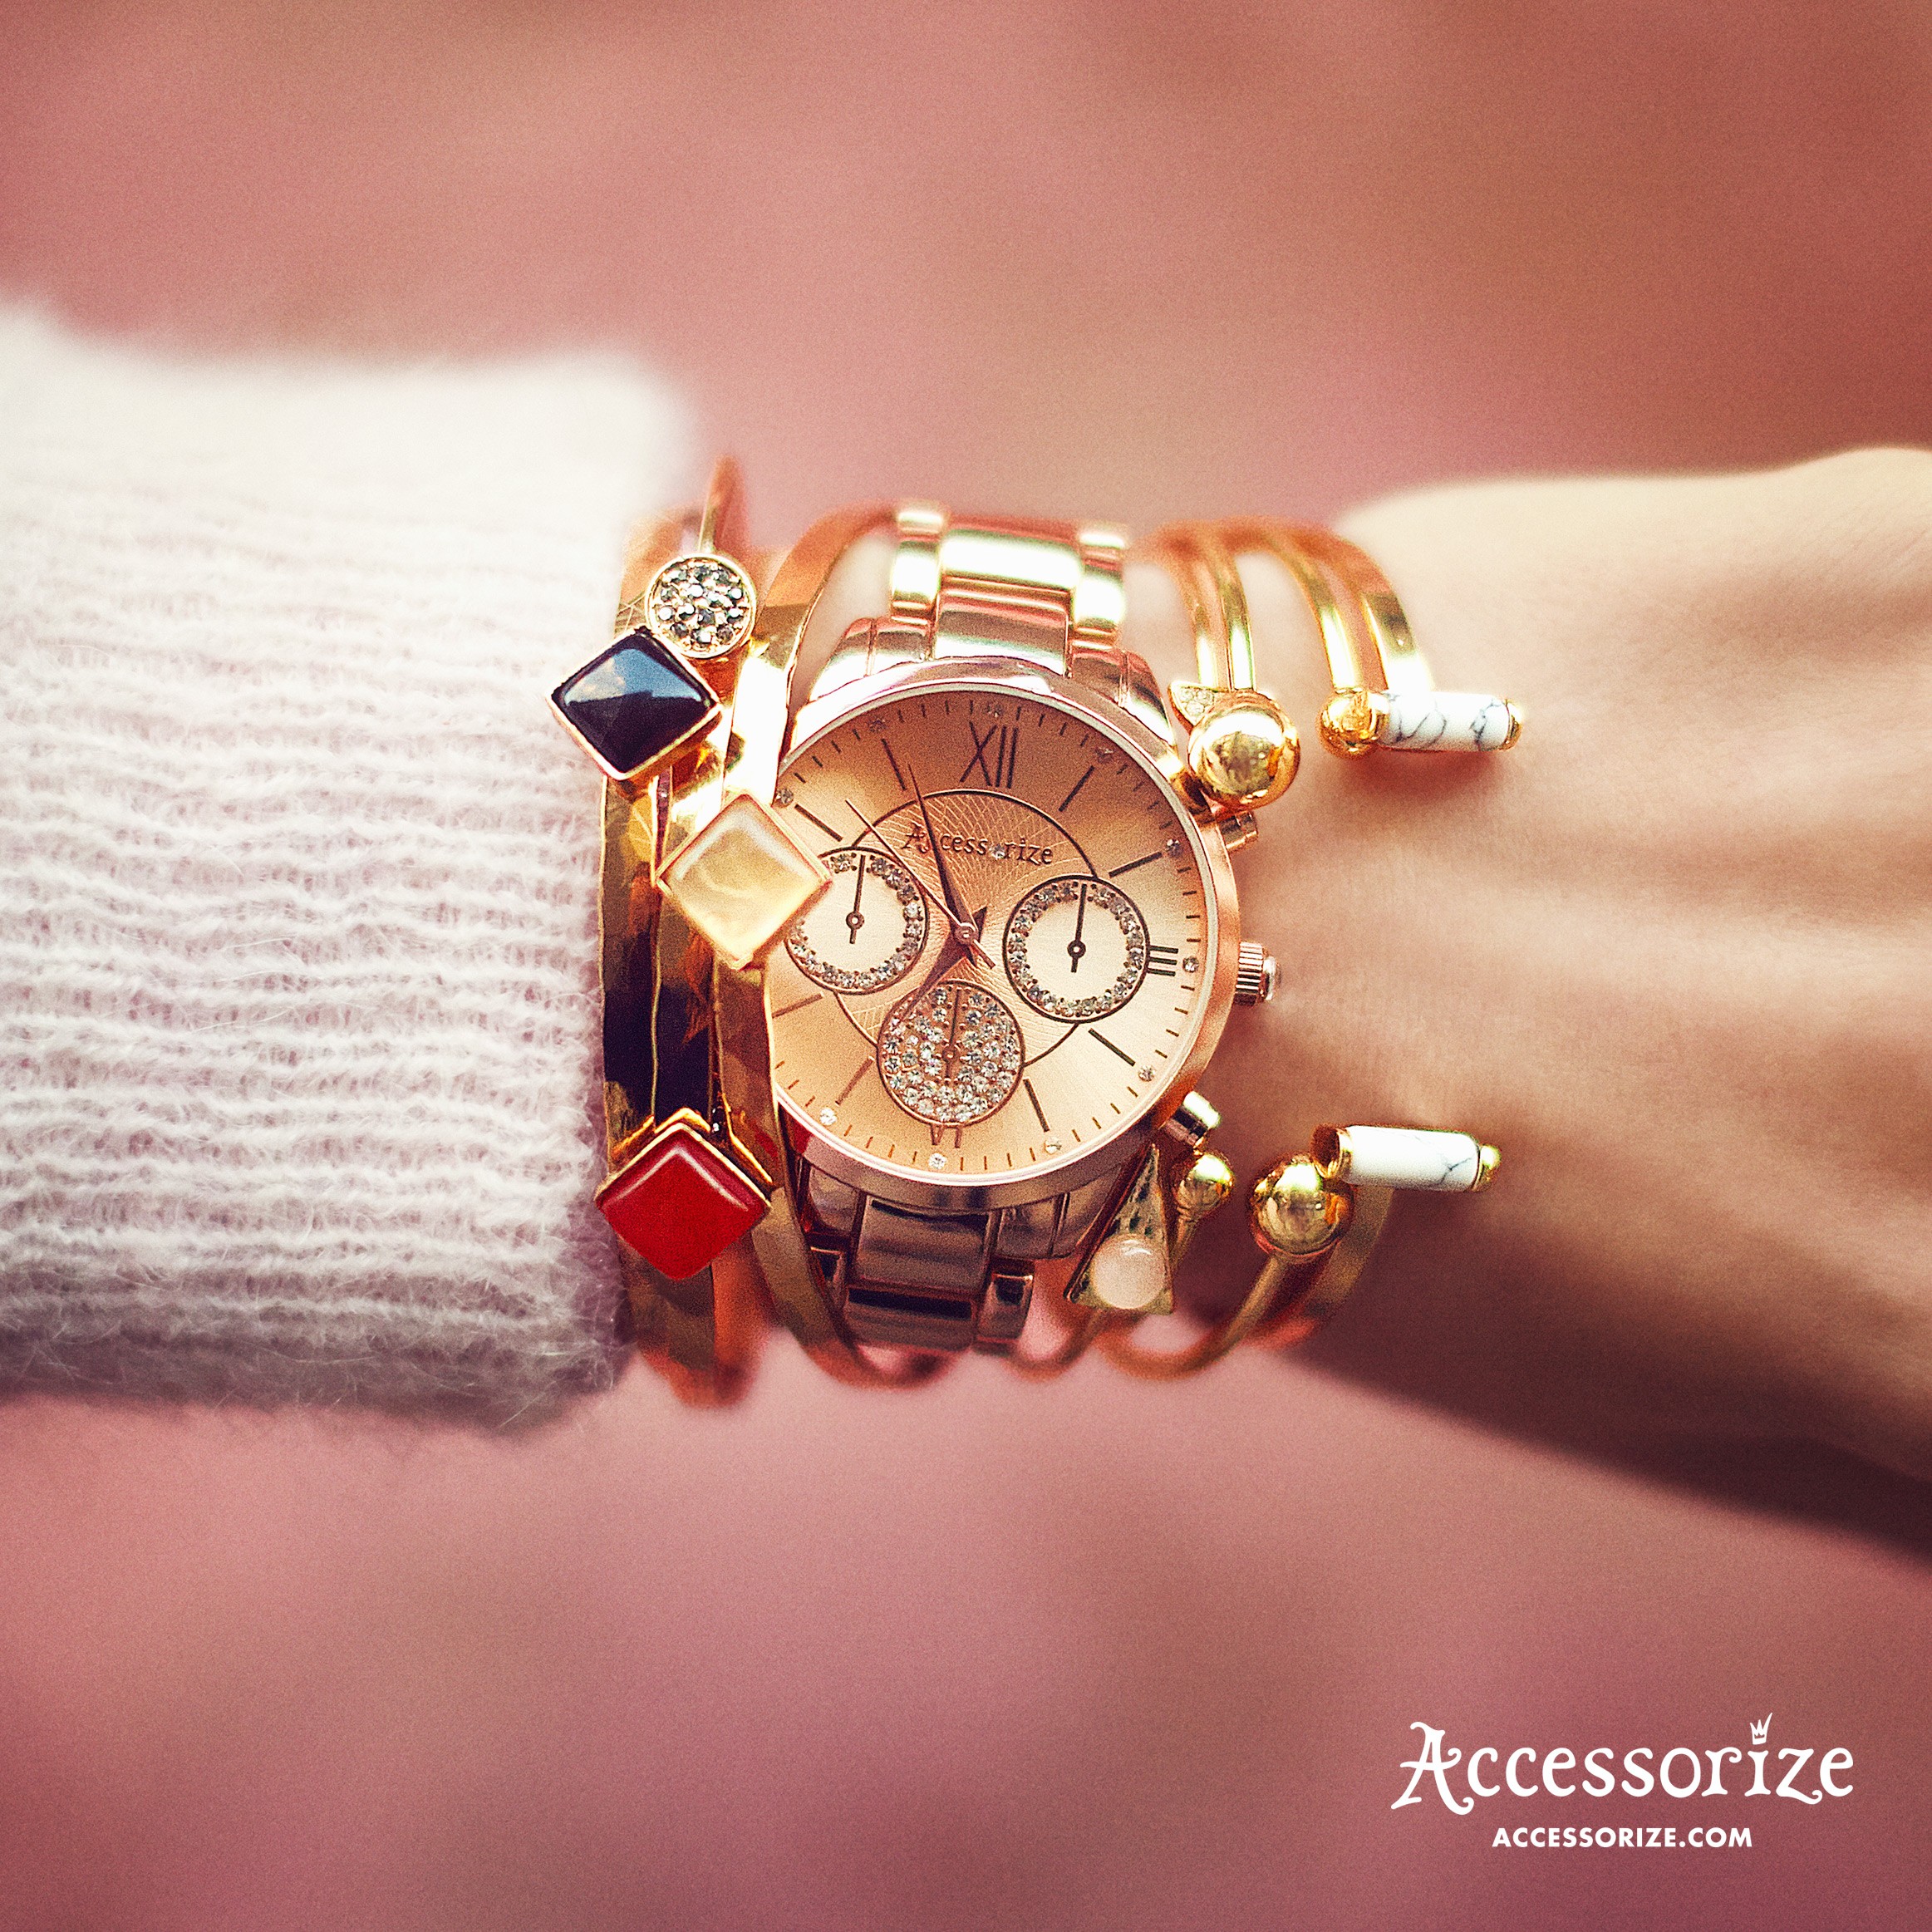 accessorize-campaign-shoes-still-life-watches-sunshine-summer-ruth-rose-5